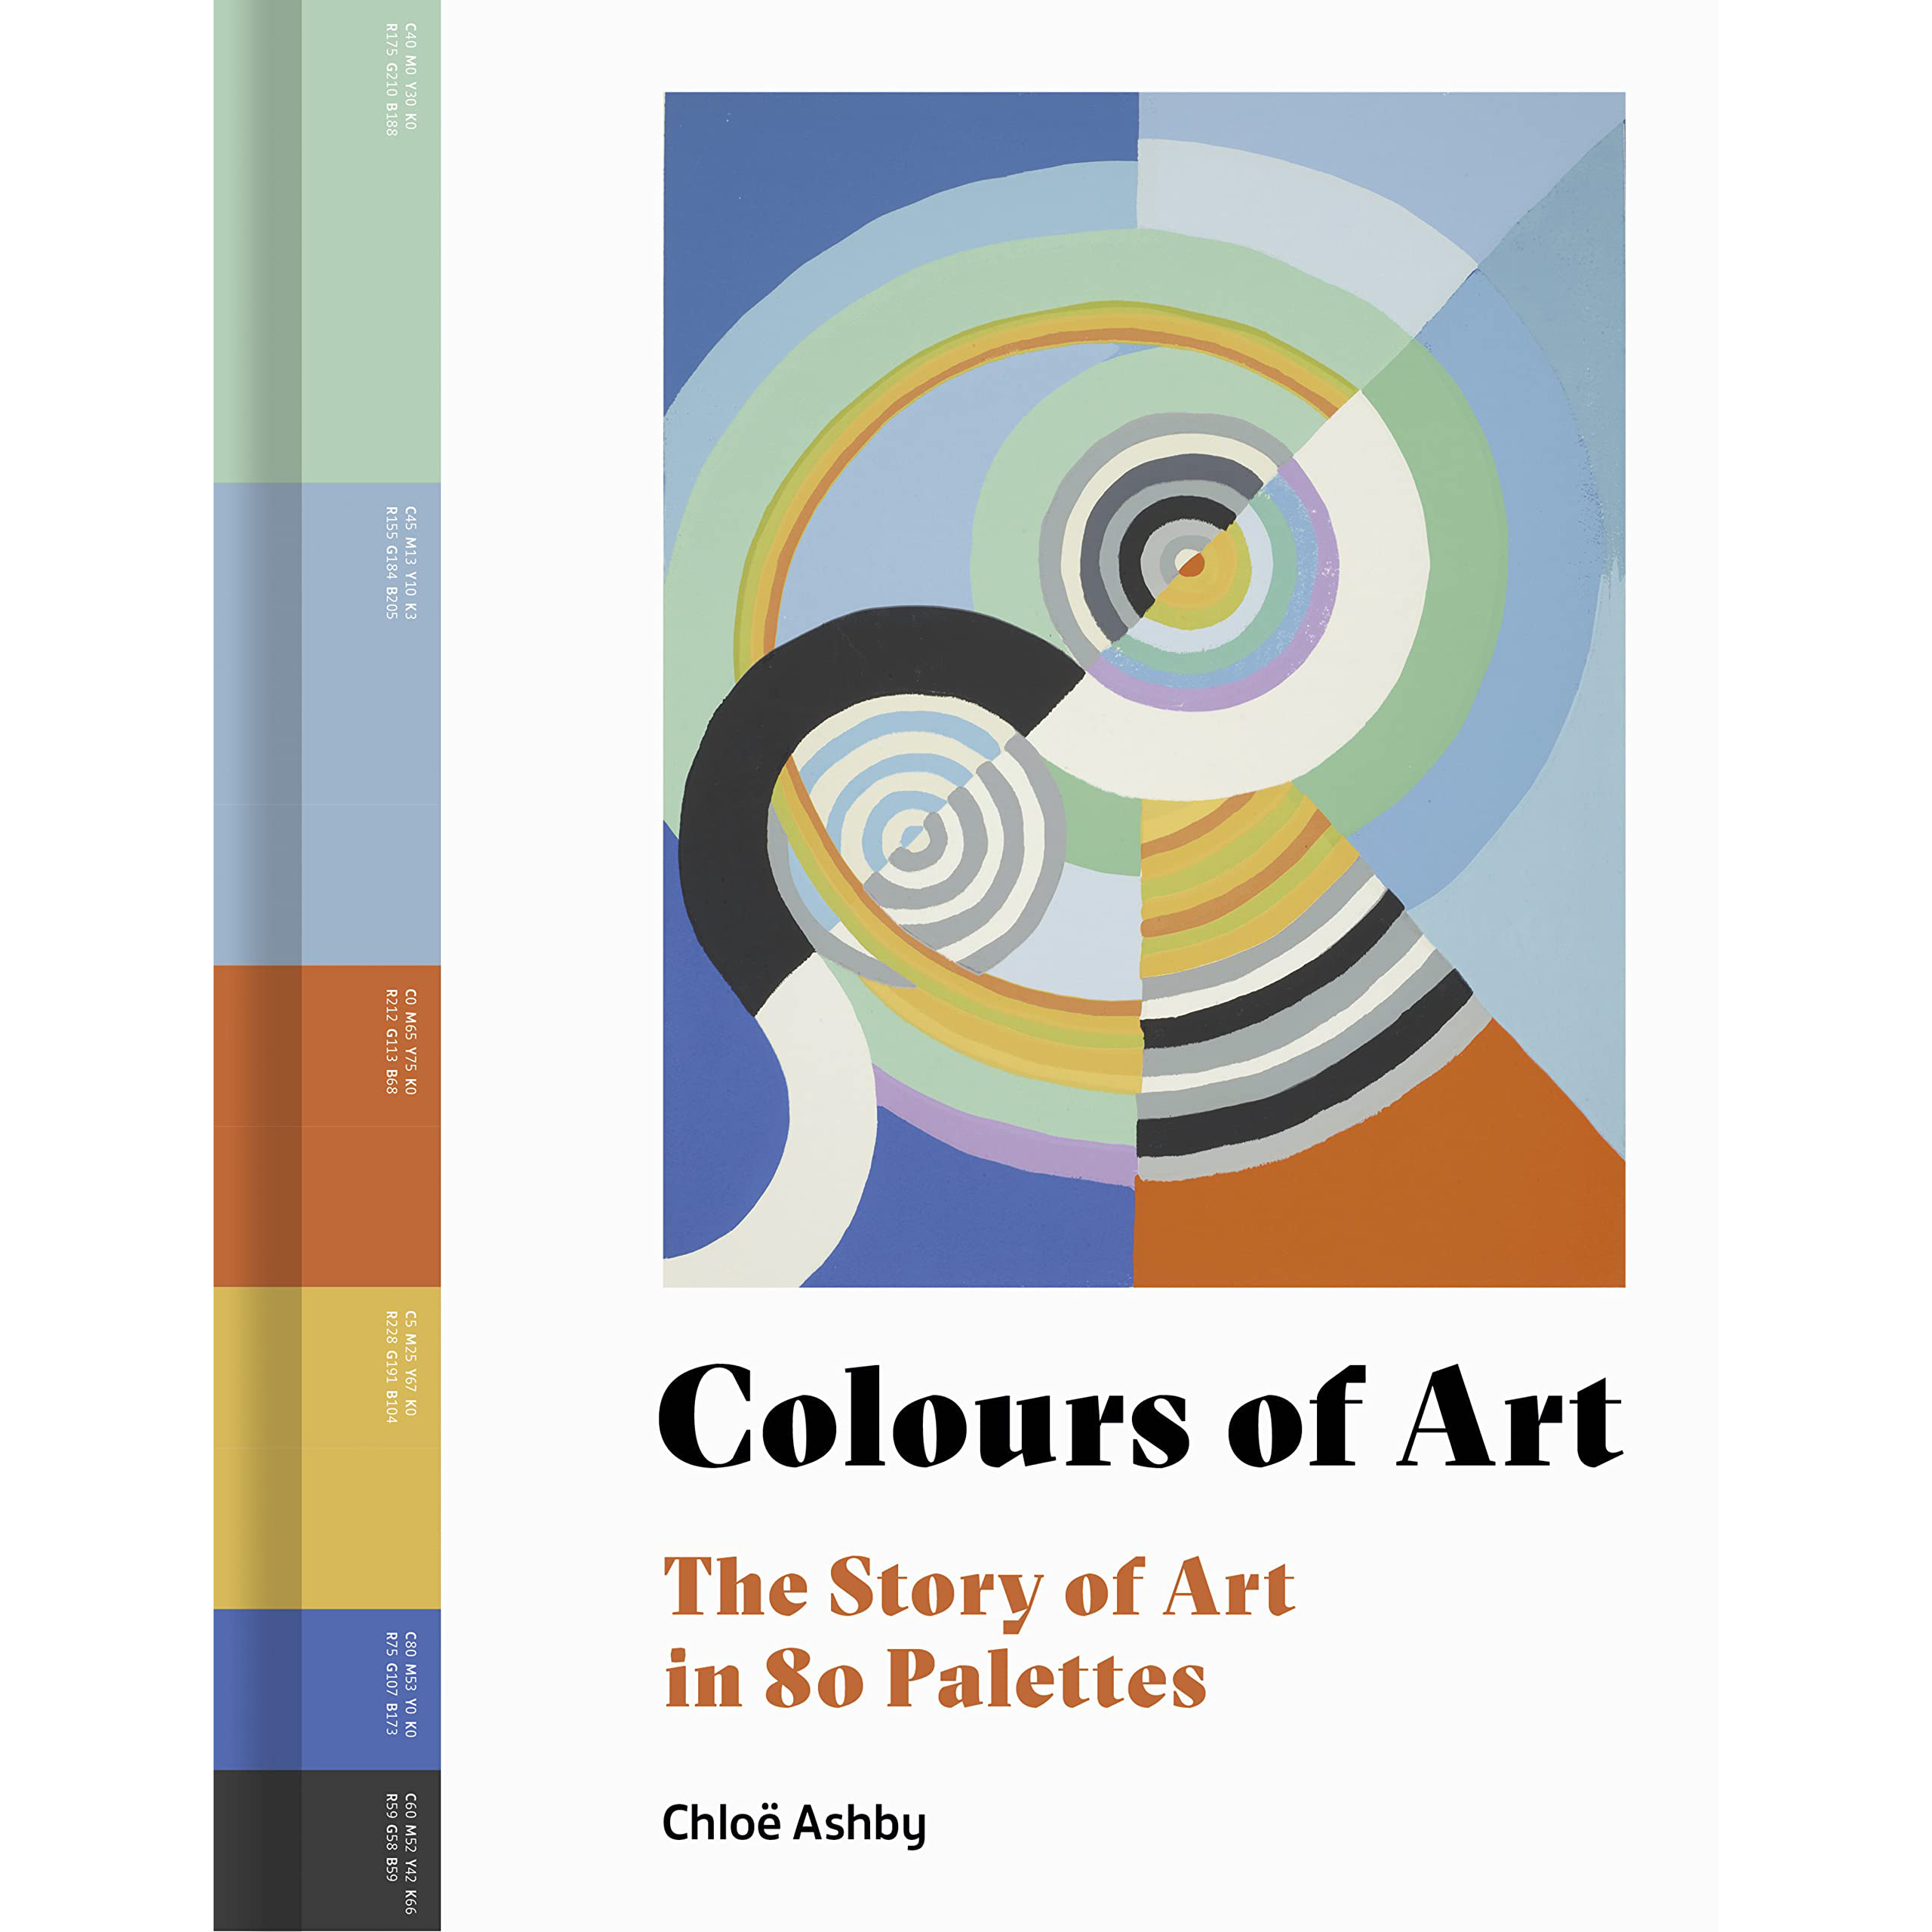 Colours of Art : The Story of Art in 80 Palettes